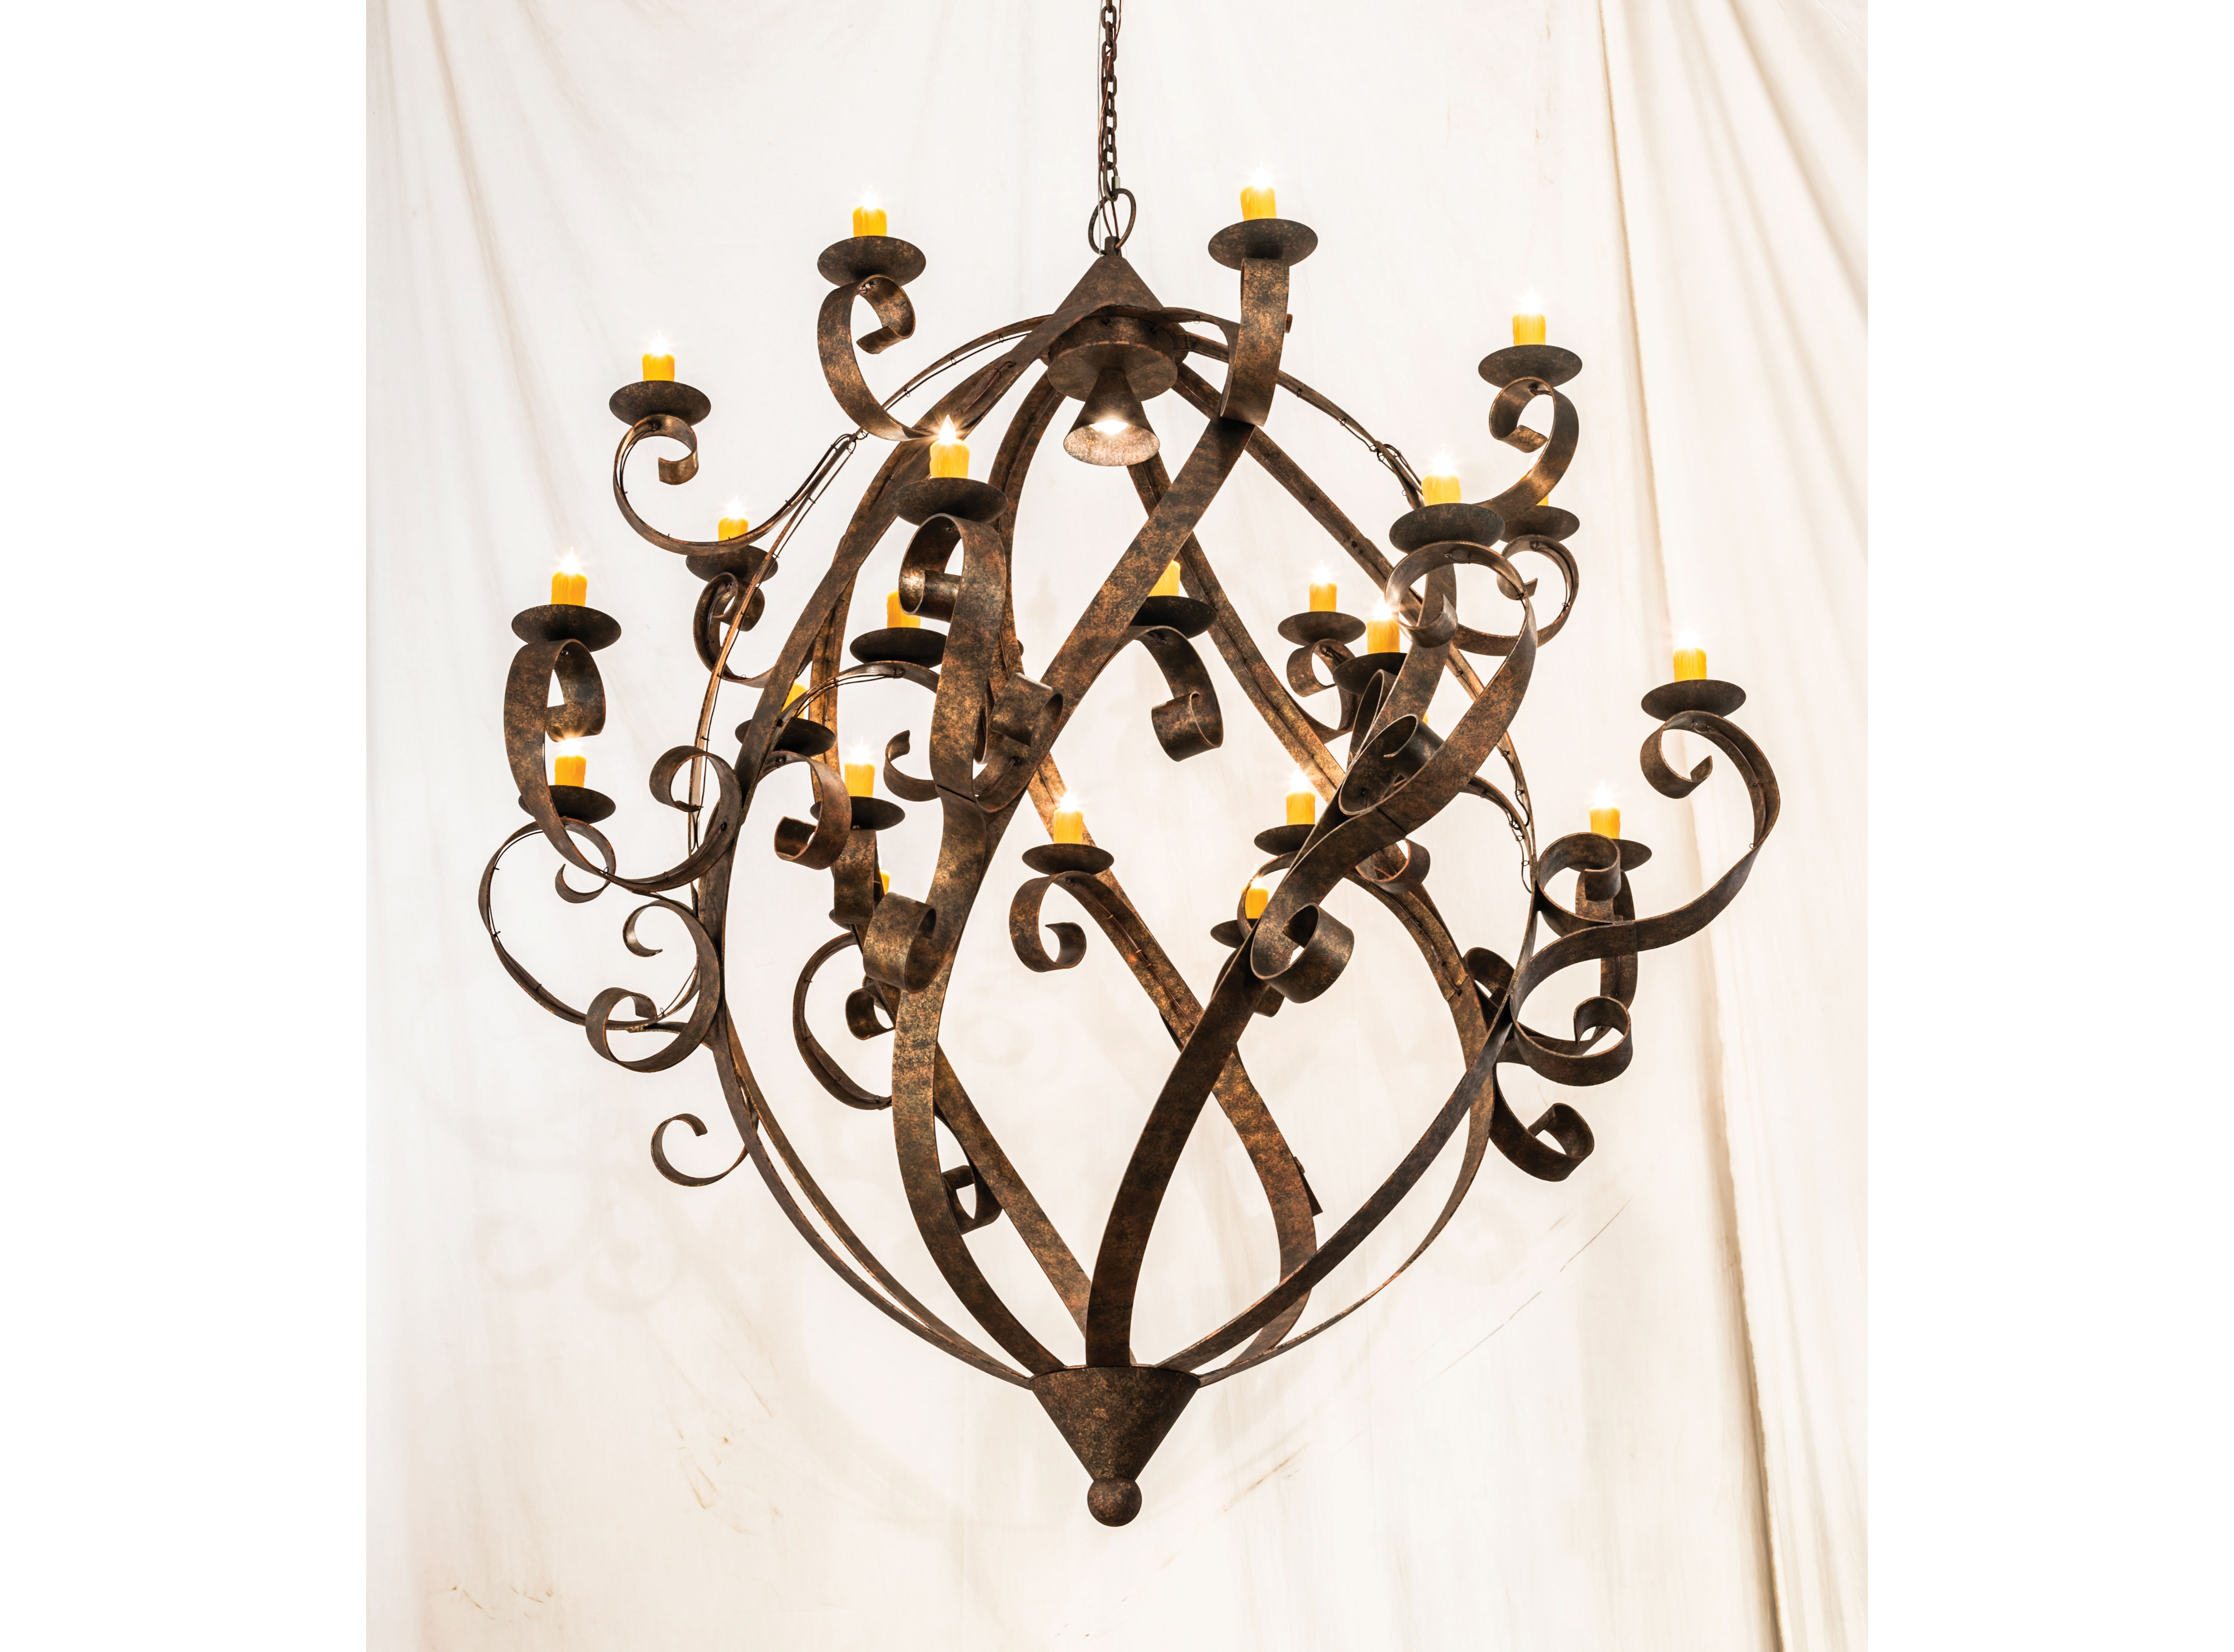 2nd Ave Lighting’s Caliope Chandelier